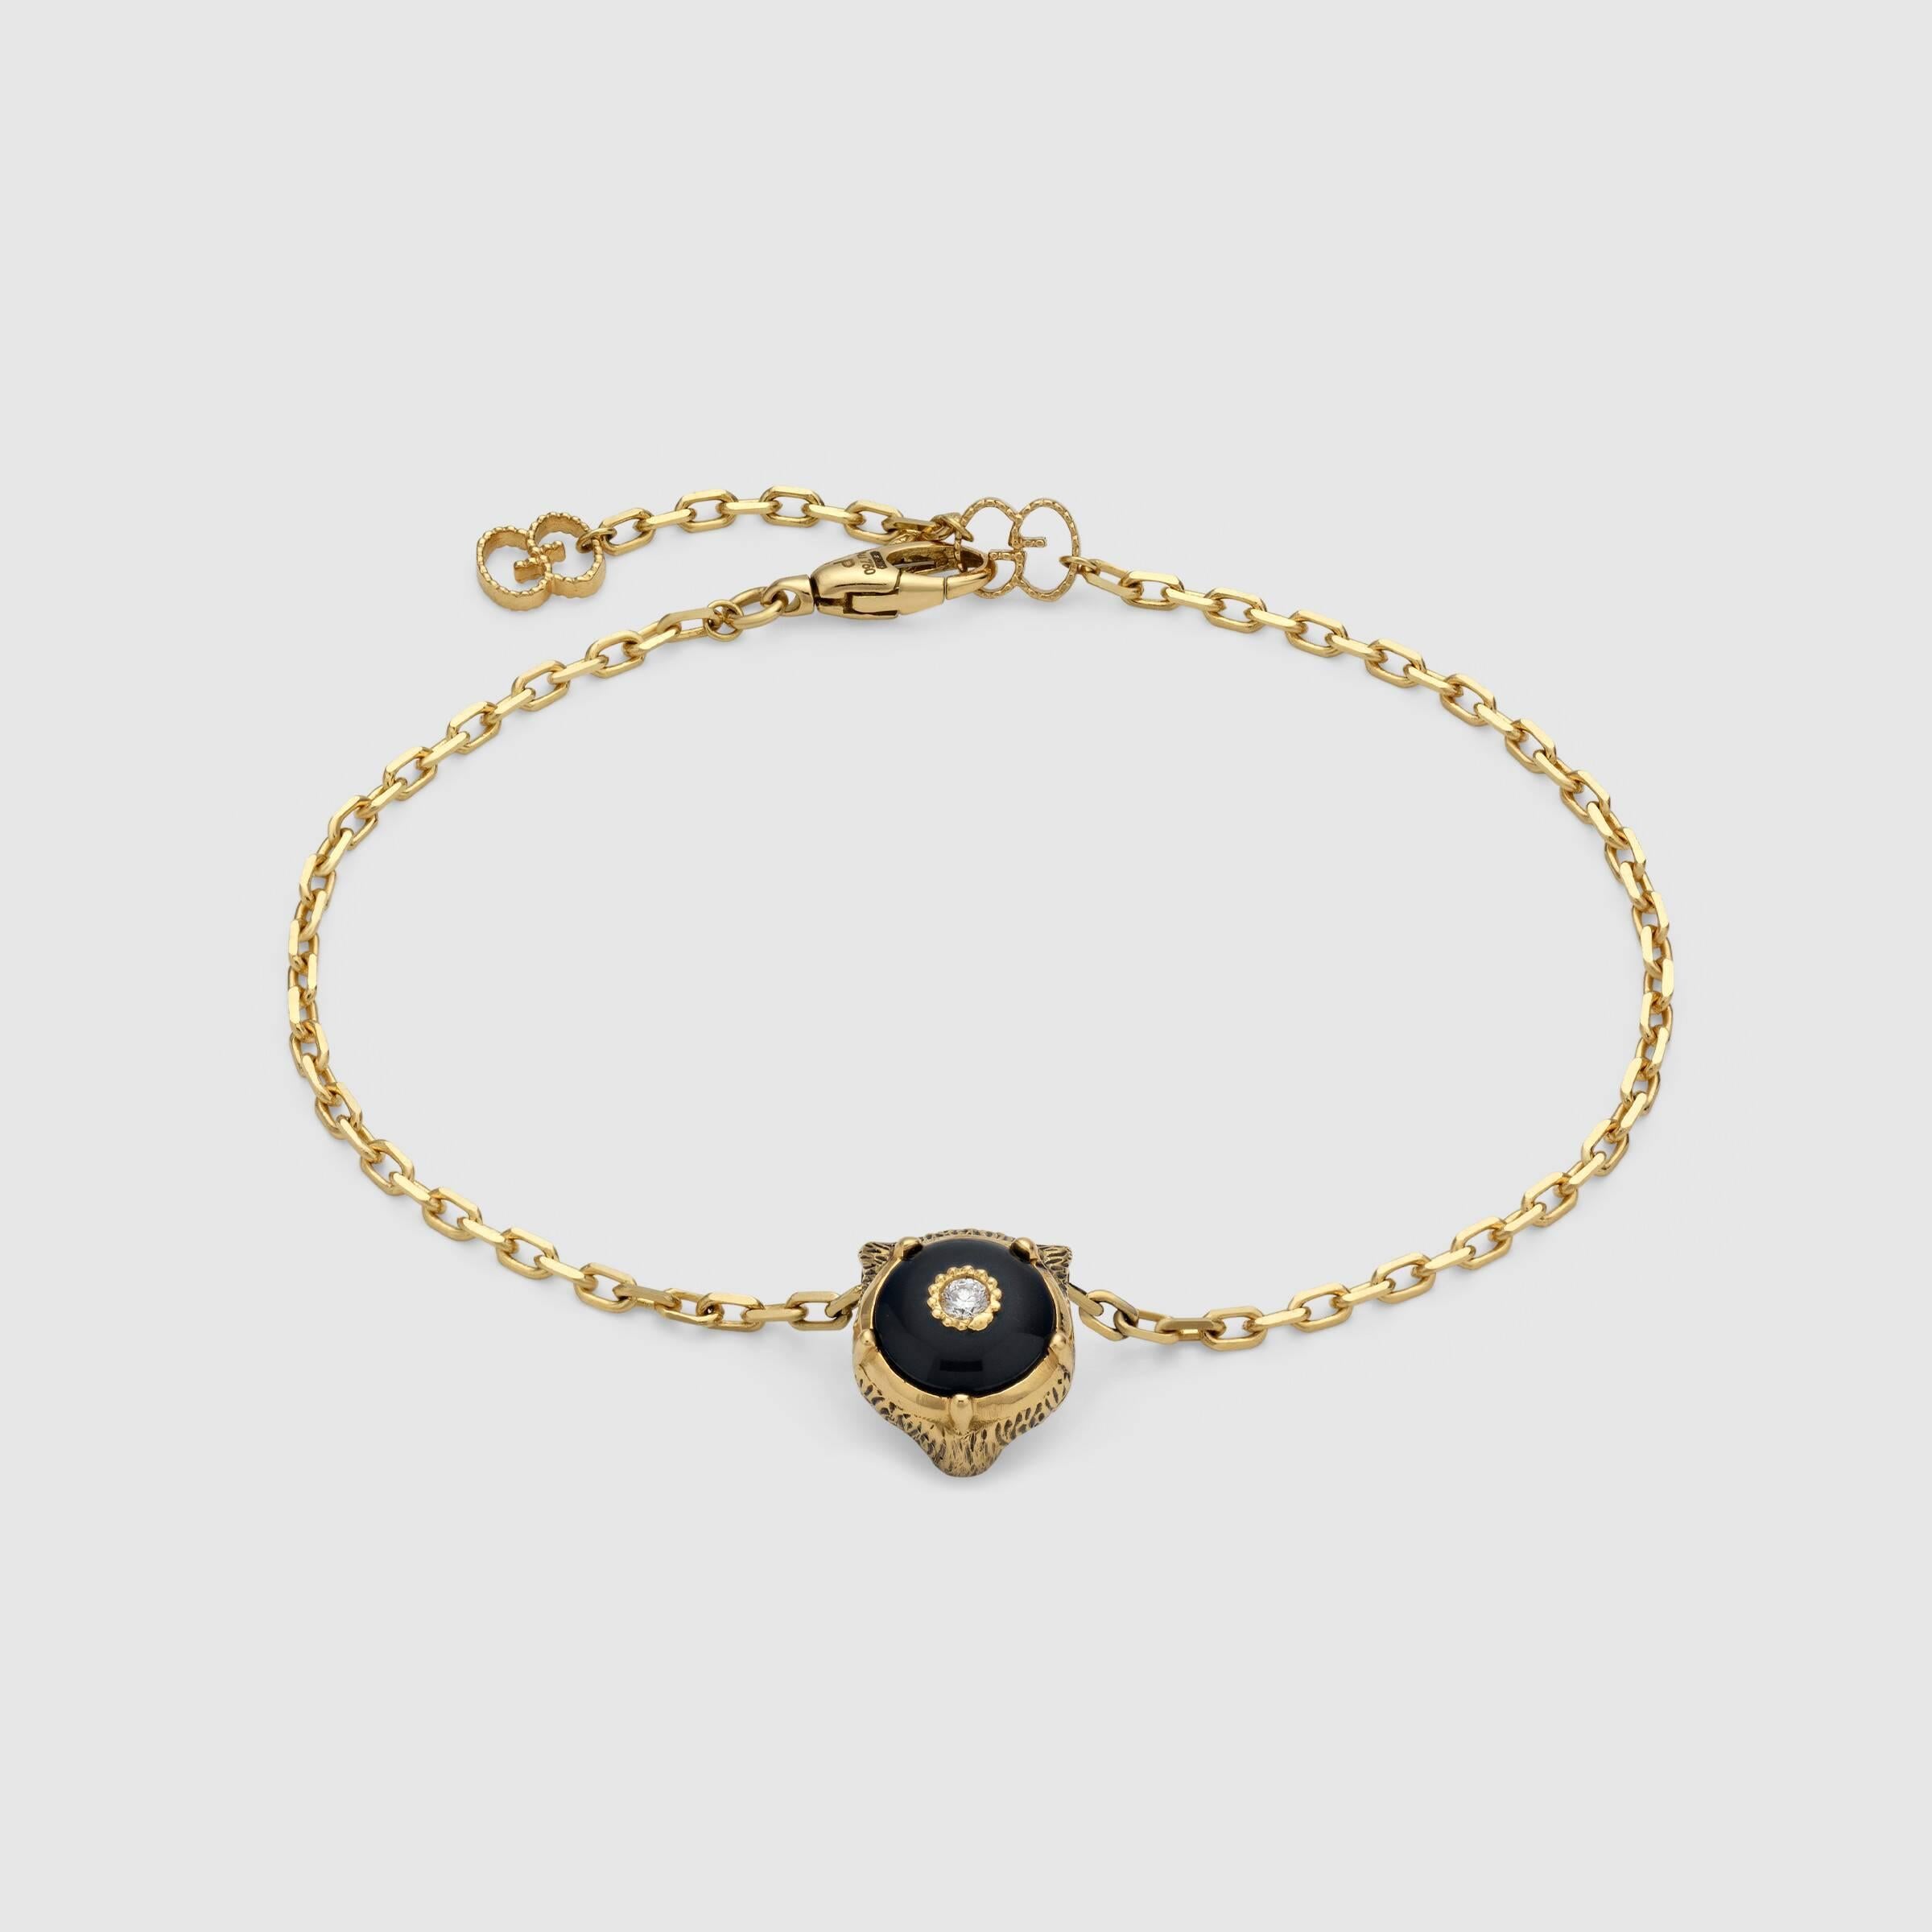 The feline head continues to be a defining motif of the House, incorporated within the Le Marché des Merveilles collection. Crafted from 18k yellow gold, it is enriched with diamond-set eyes and a black onyx with a center diamond on the opposite